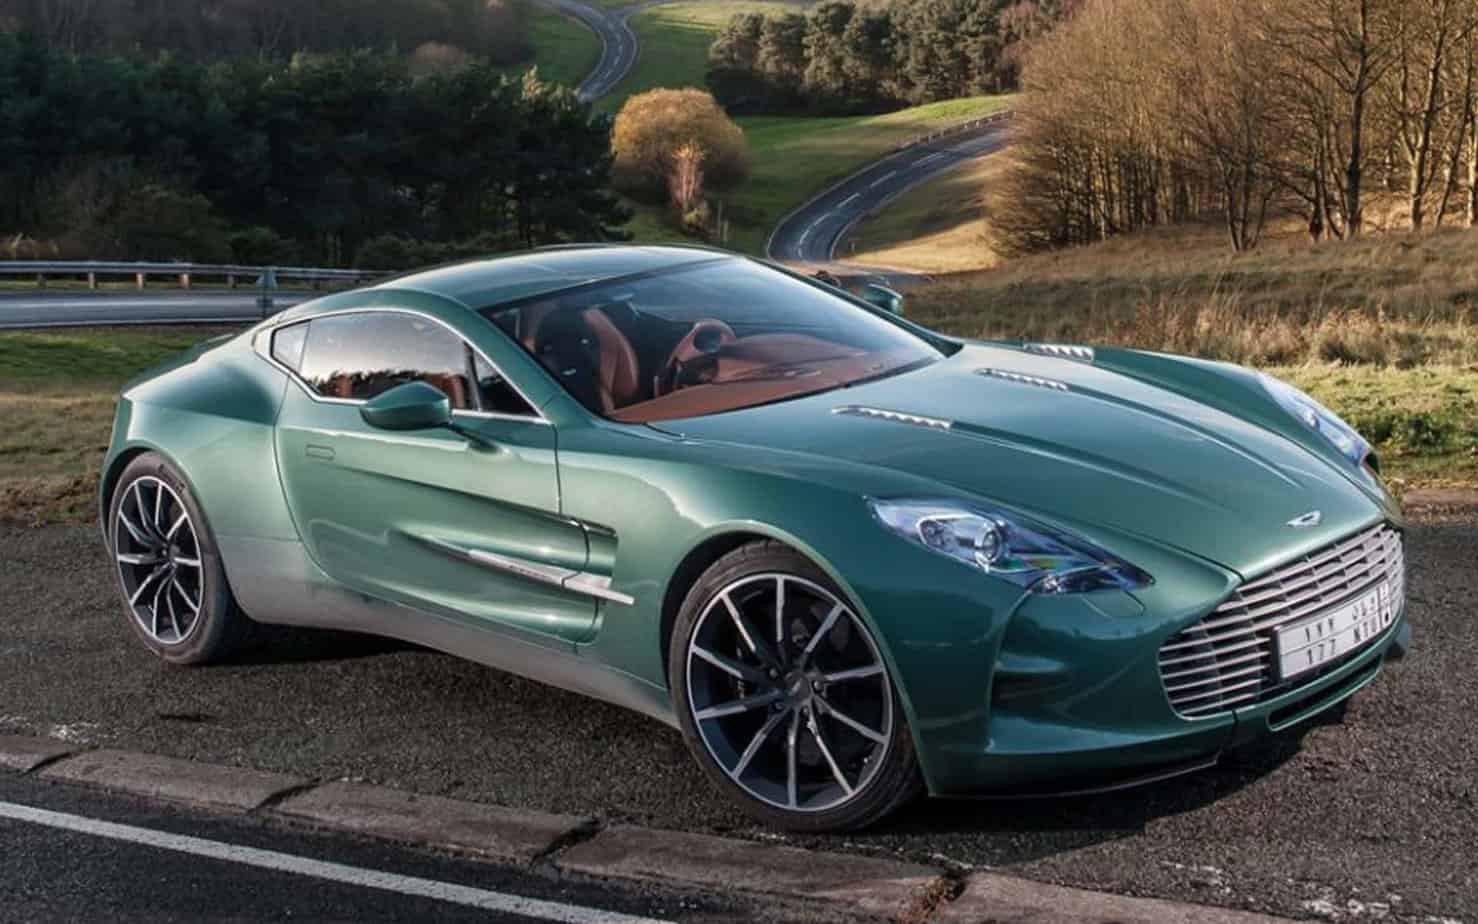 Aston Martin Just Received A Fortunate Bailout!